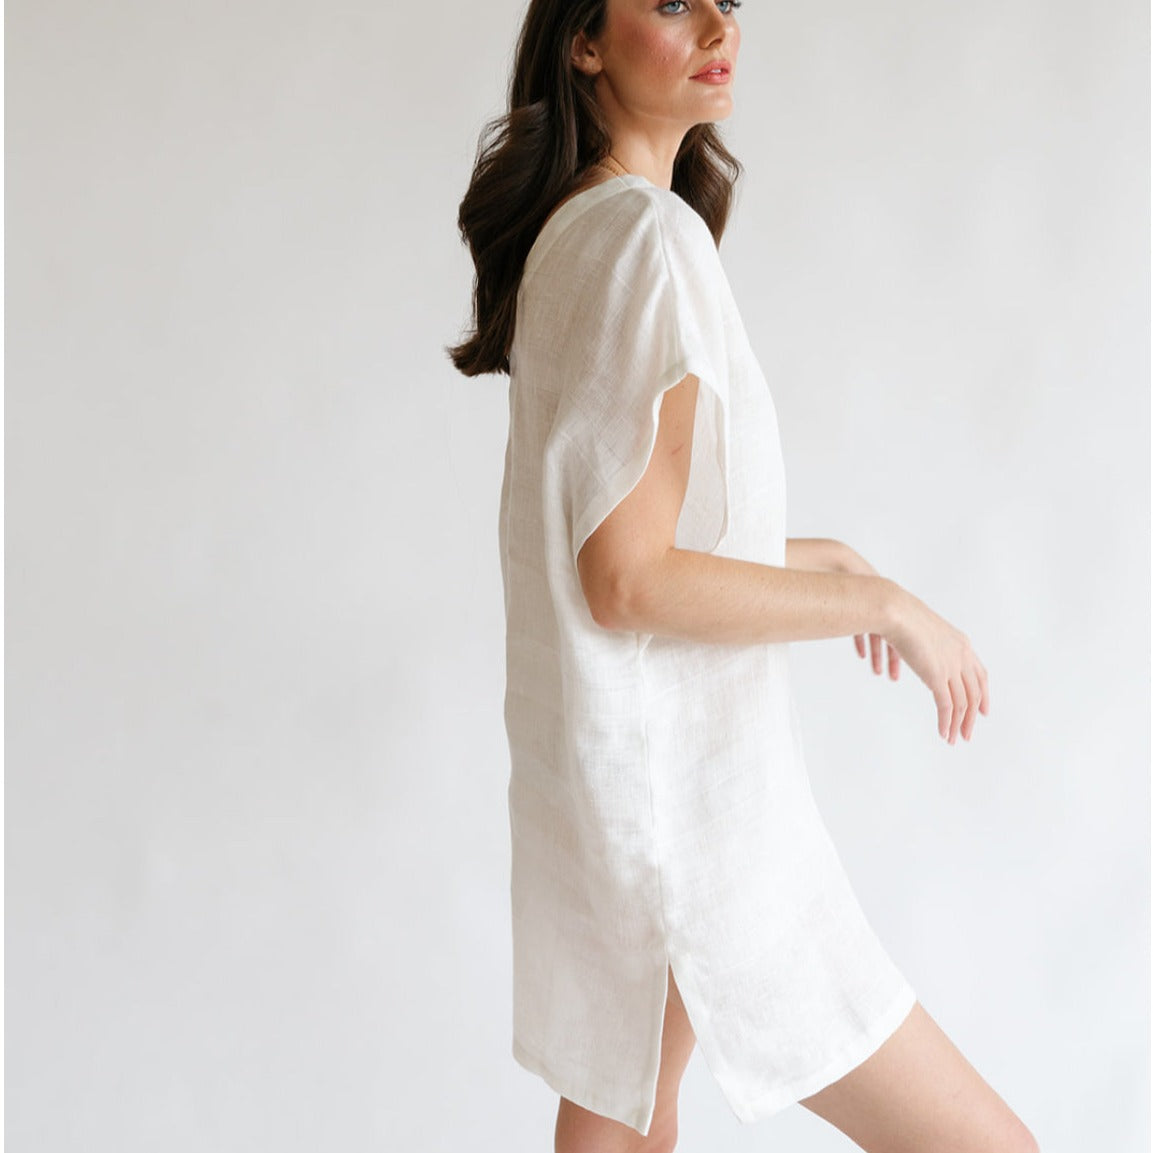 the JEWEL coverup in white